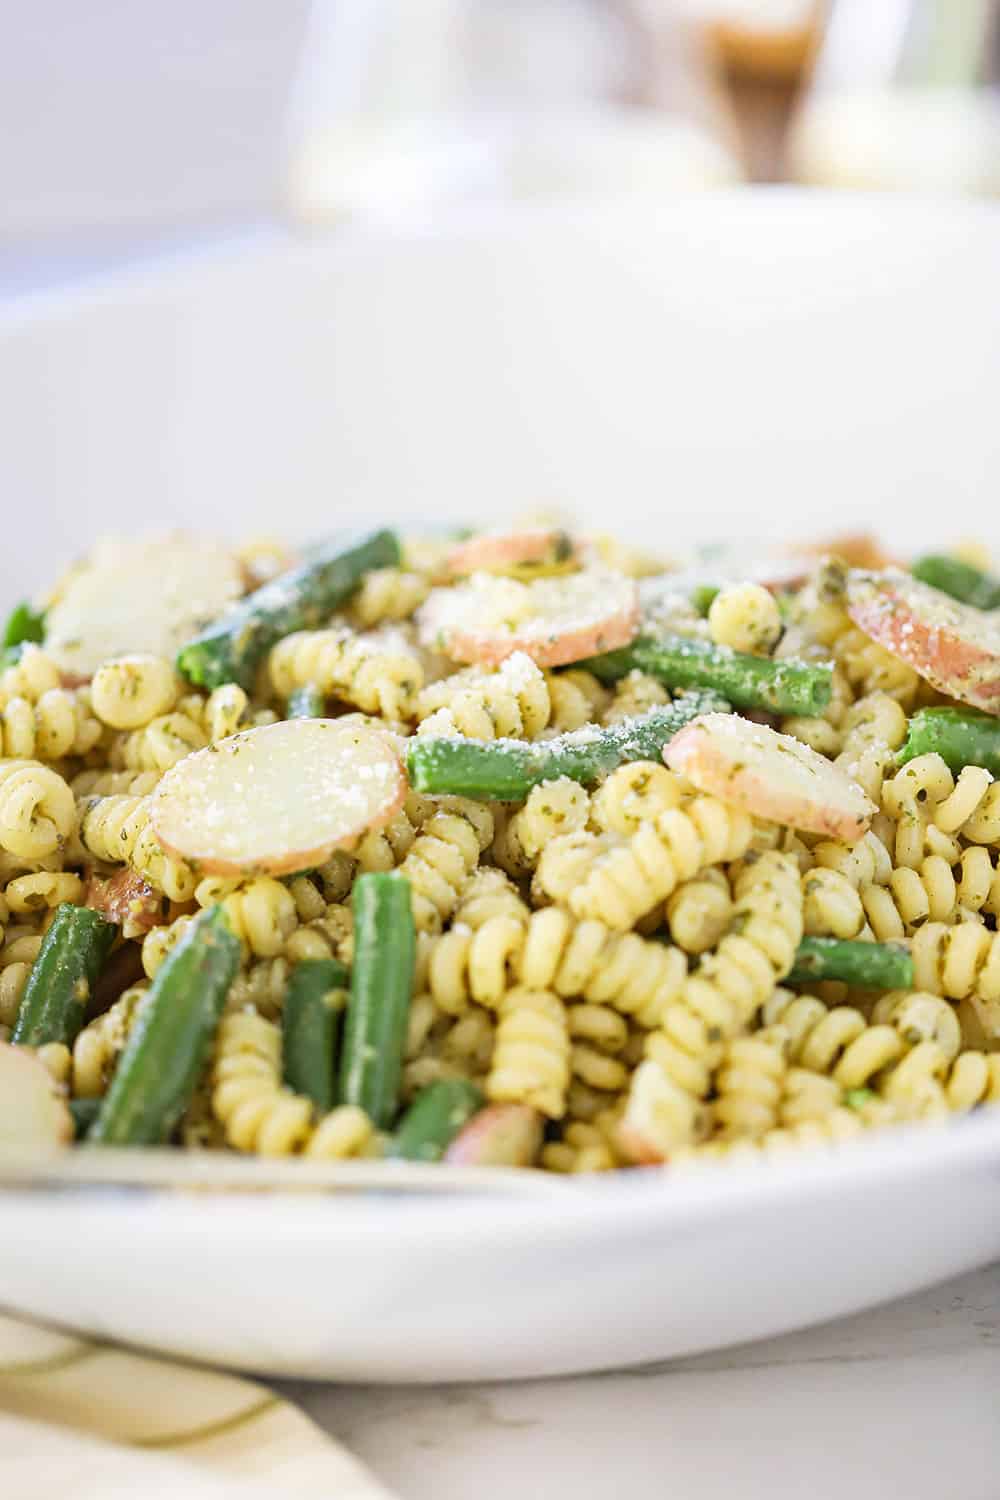 A close up view of a large circular white serving bowl filled with pesto pasta salad with sliced potatoes and green beans.